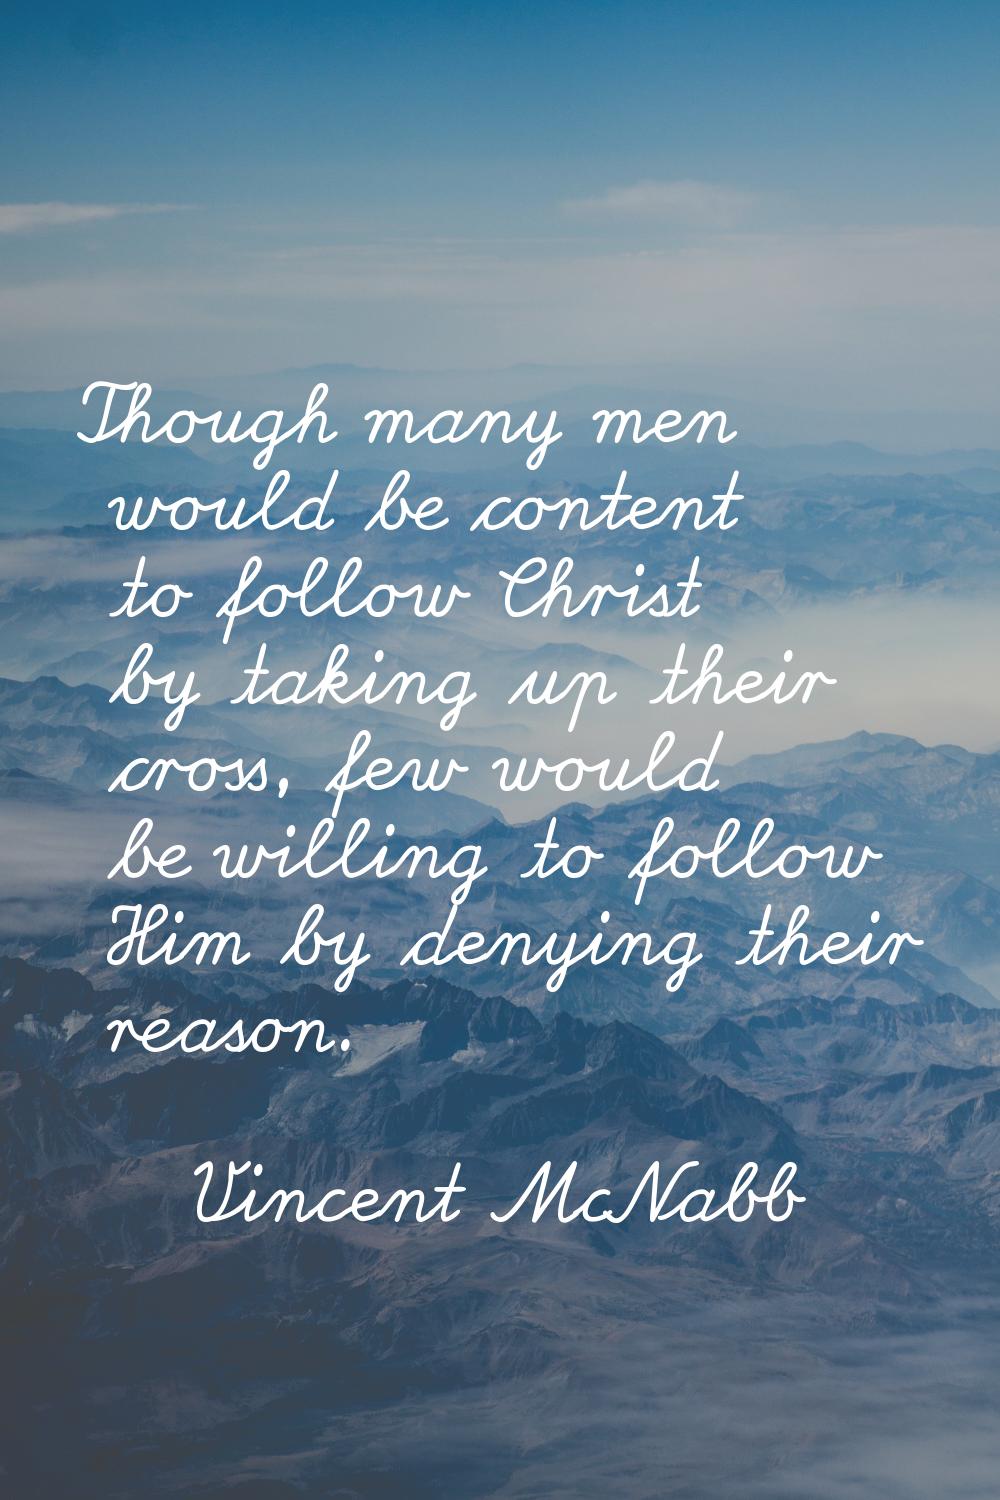 Though many men would be content to follow Christ by taking up their cross, few would be willing to